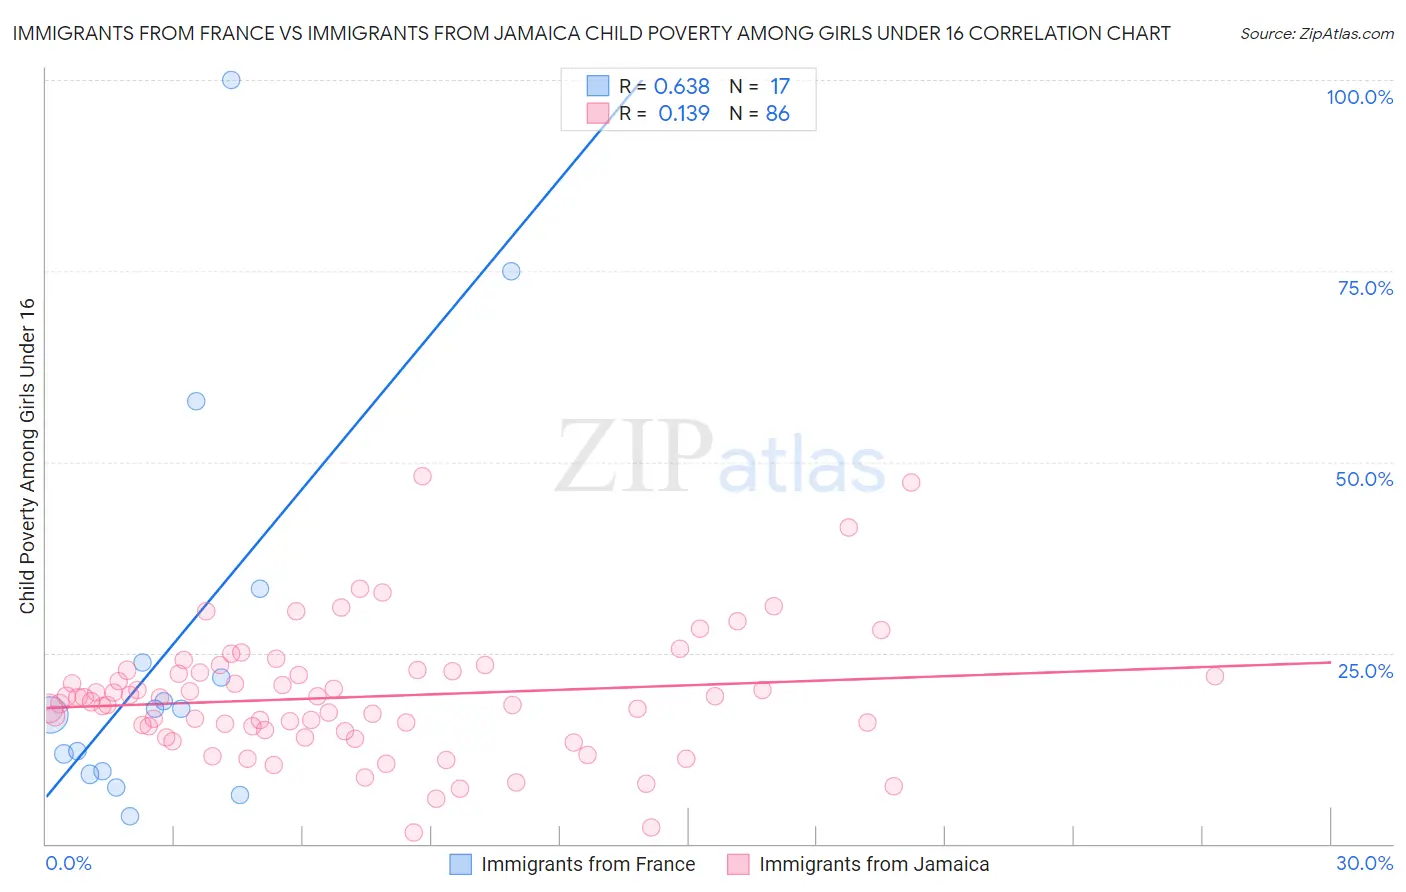 Immigrants from France vs Immigrants from Jamaica Child Poverty Among Girls Under 16